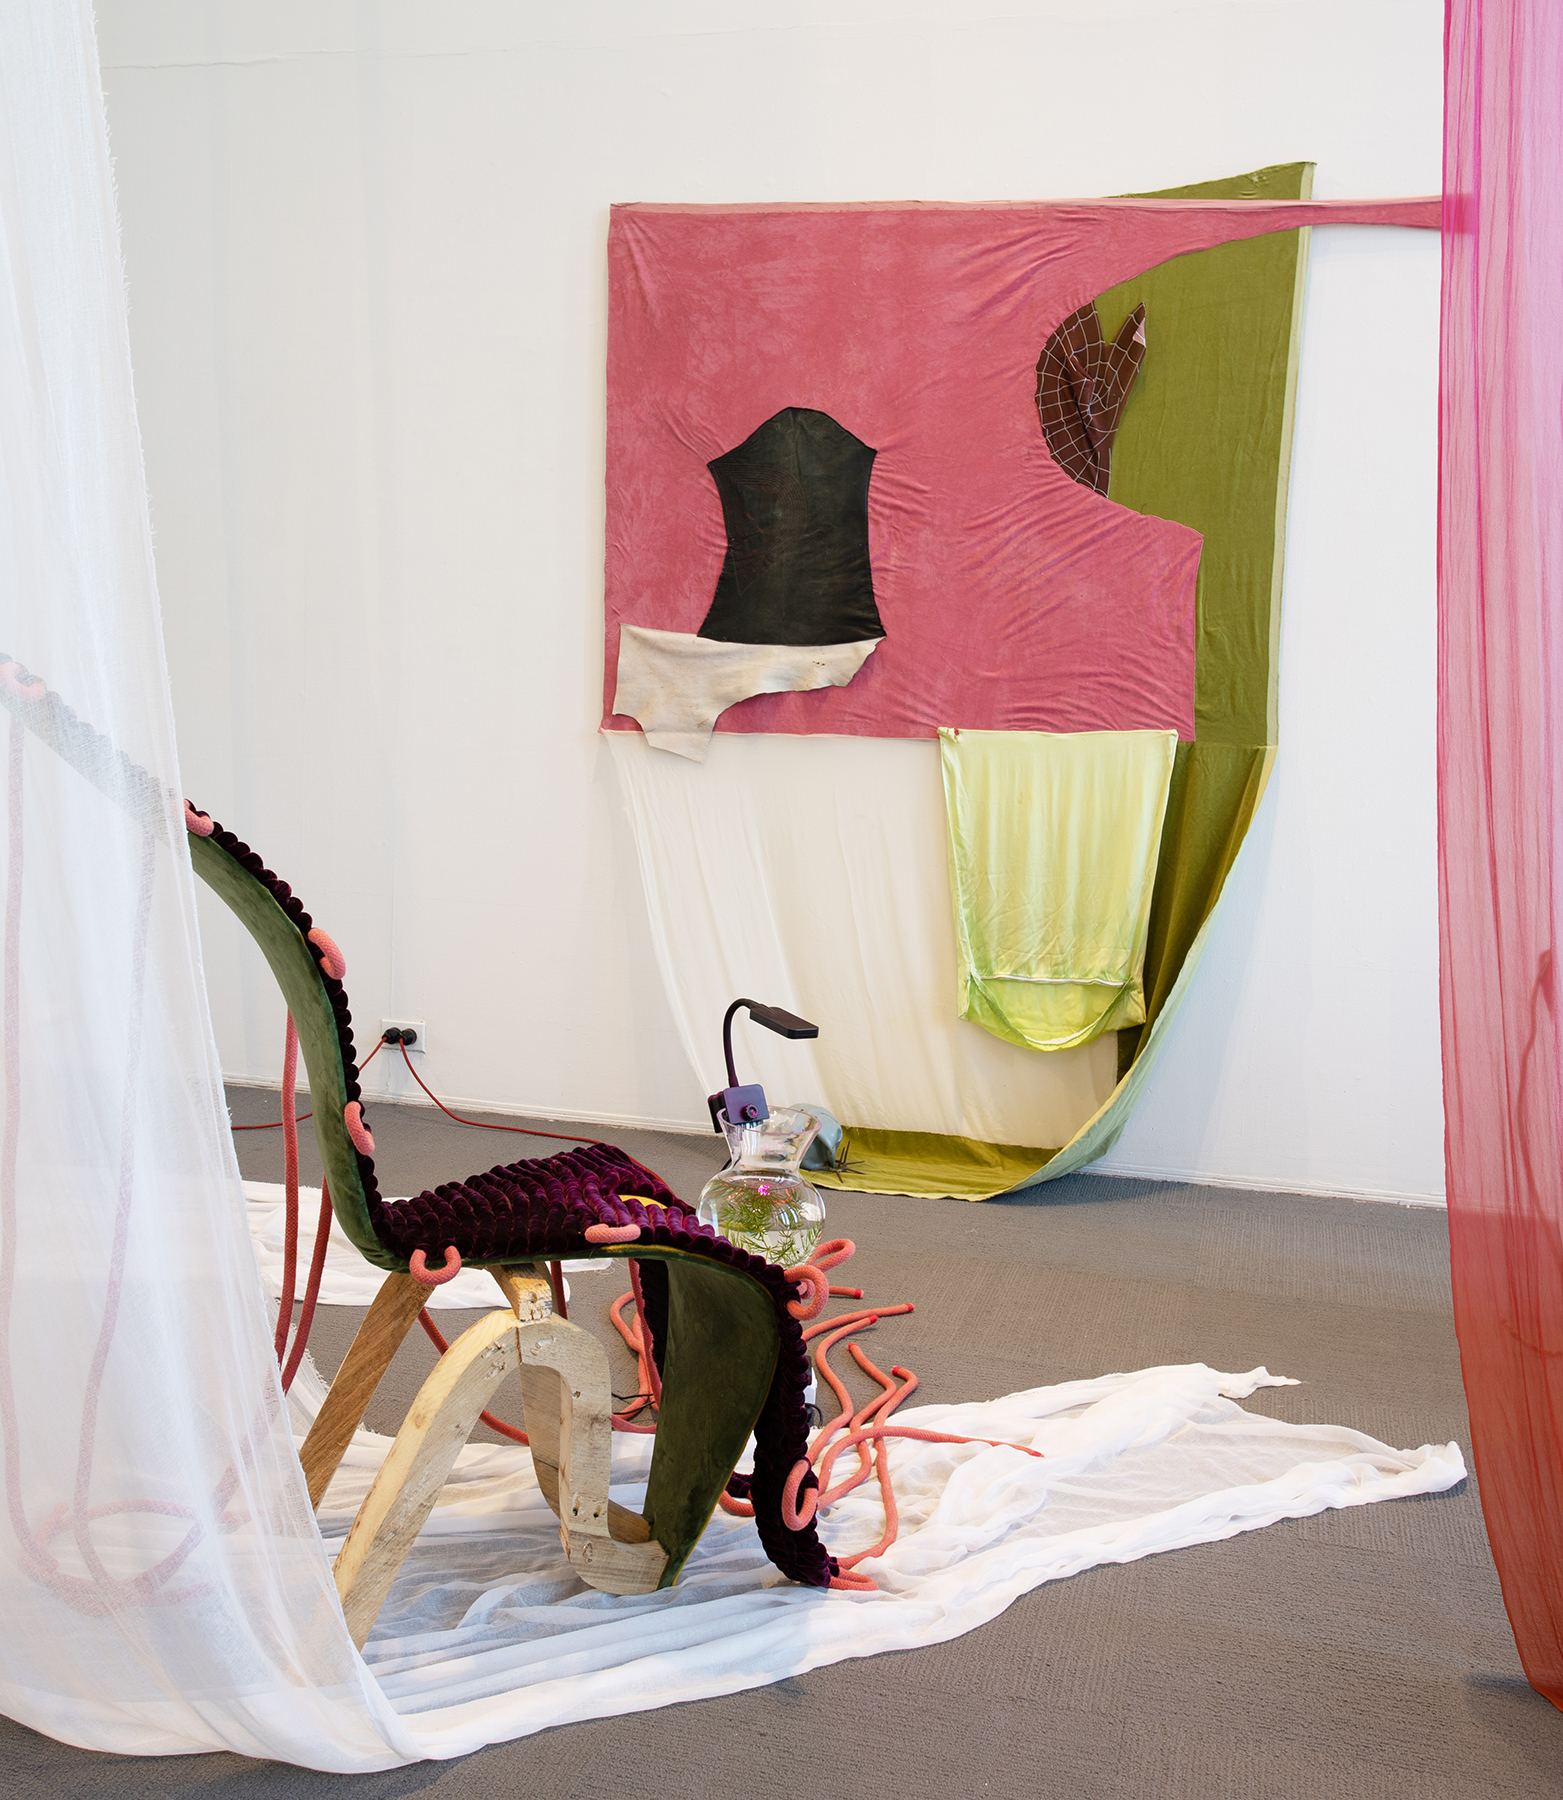 A lounge chair made from lumber and velvet framed by hanging curtains. At the bottom of the seat sits a glass vase with plants. A fabric-covered painting is in the background with elements falling to the floor.